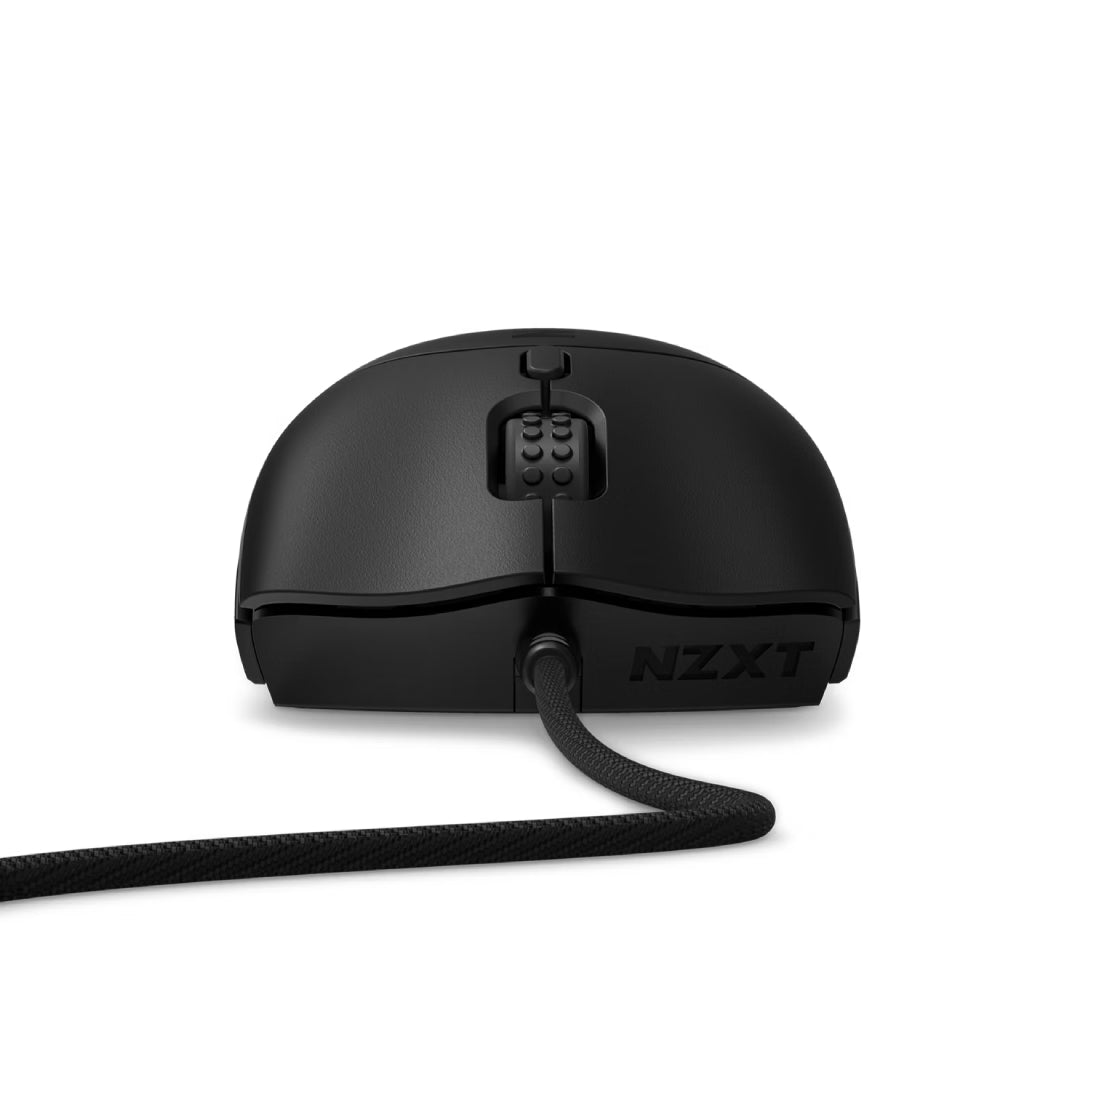 NZXT Lift 2 Symm Wired 26,000 DPI Lightweight Symmetrical Gaming Mouse - Black - فأرة - Store 974 | ستور ٩٧٤